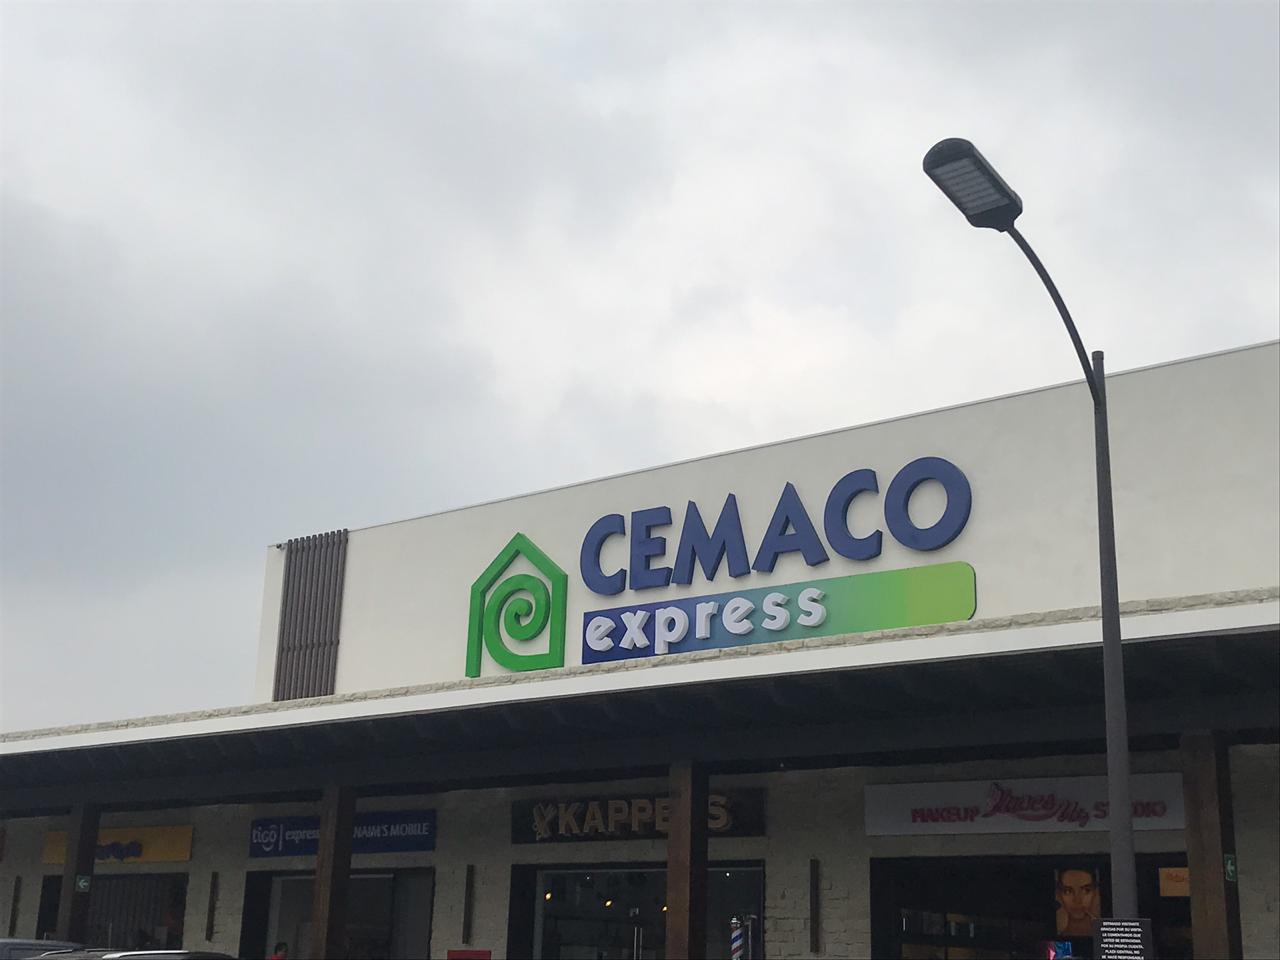 Cemaco Express